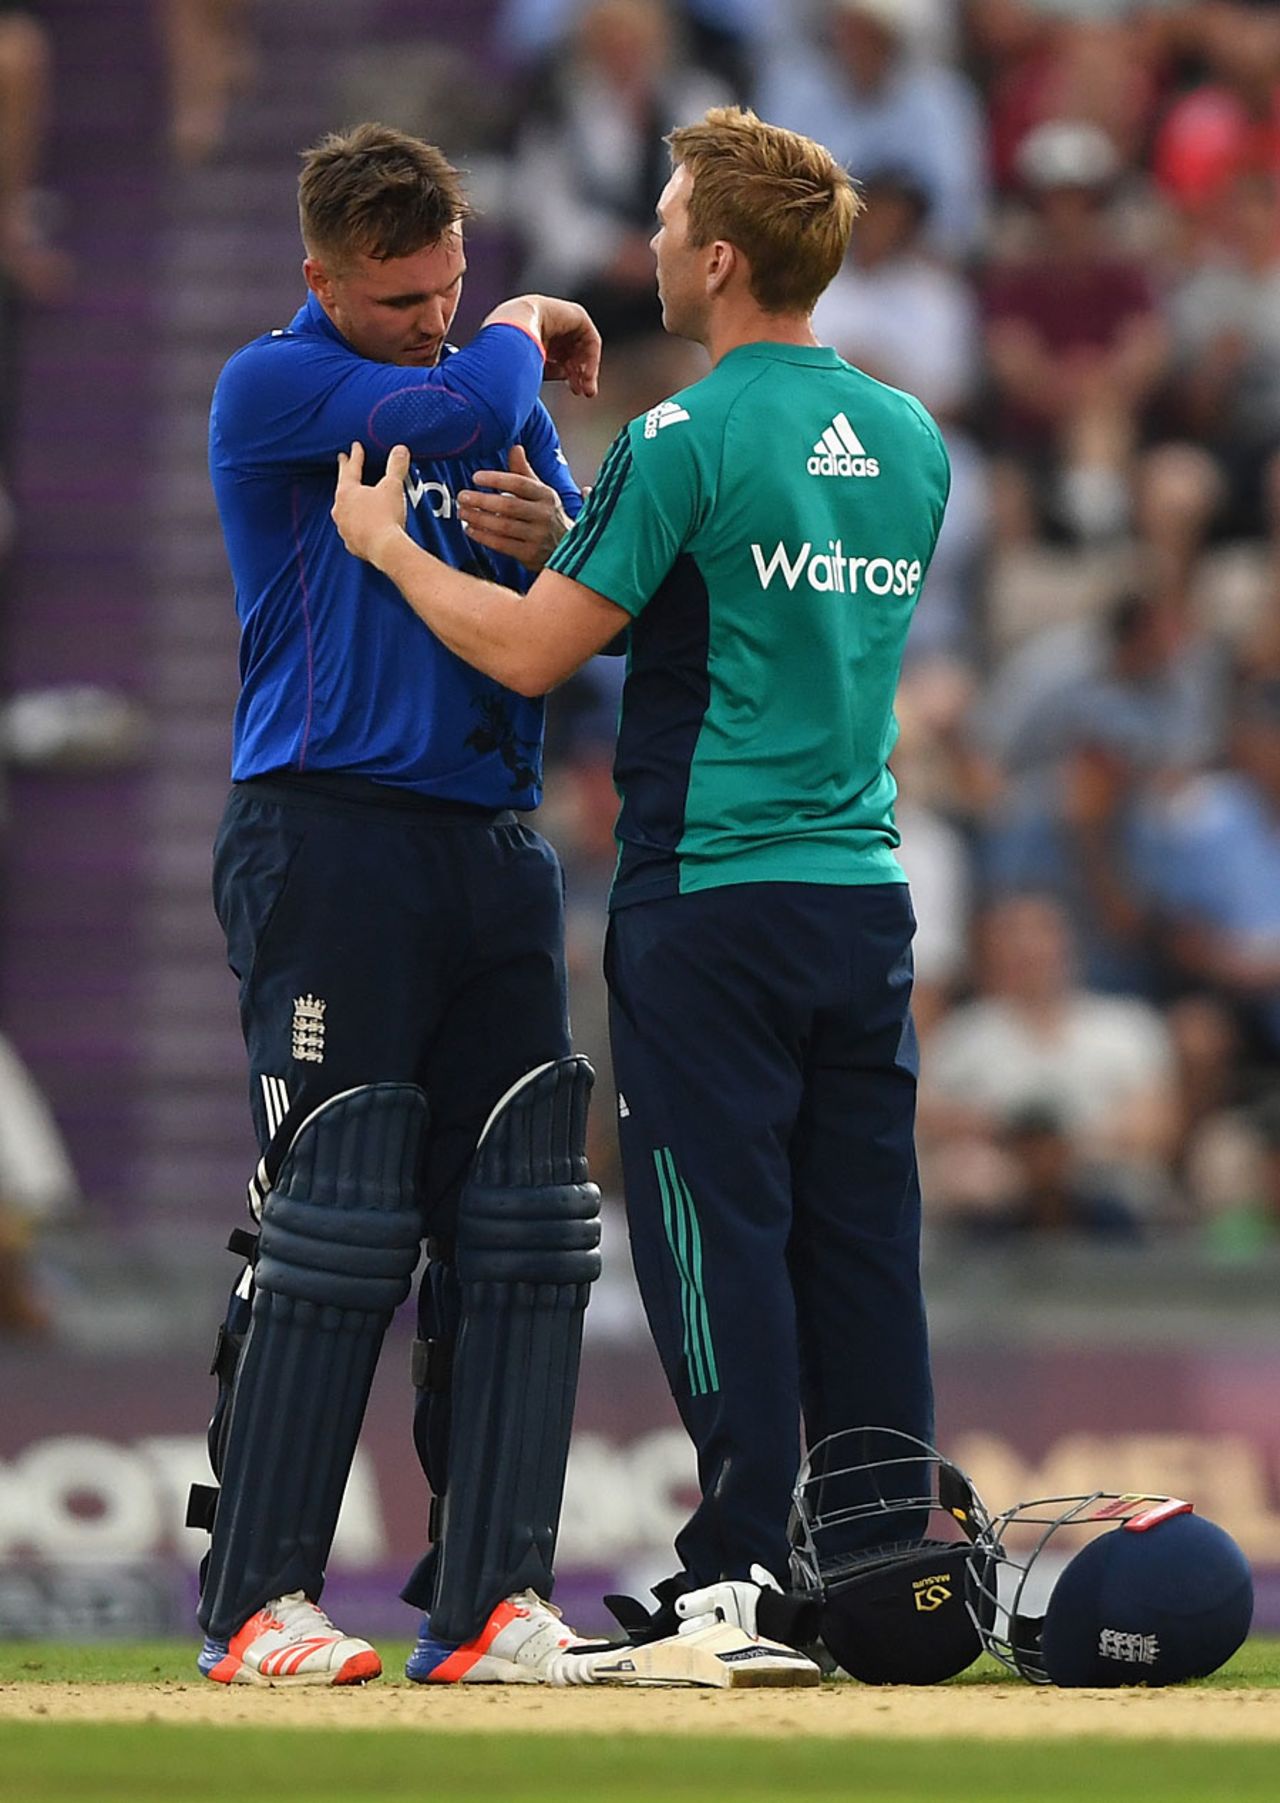 Jason Roy needed treatment after appearing to feel dizzy, England v Pakistan, 1st ODI, Ageas Bowl, August 24, 2016